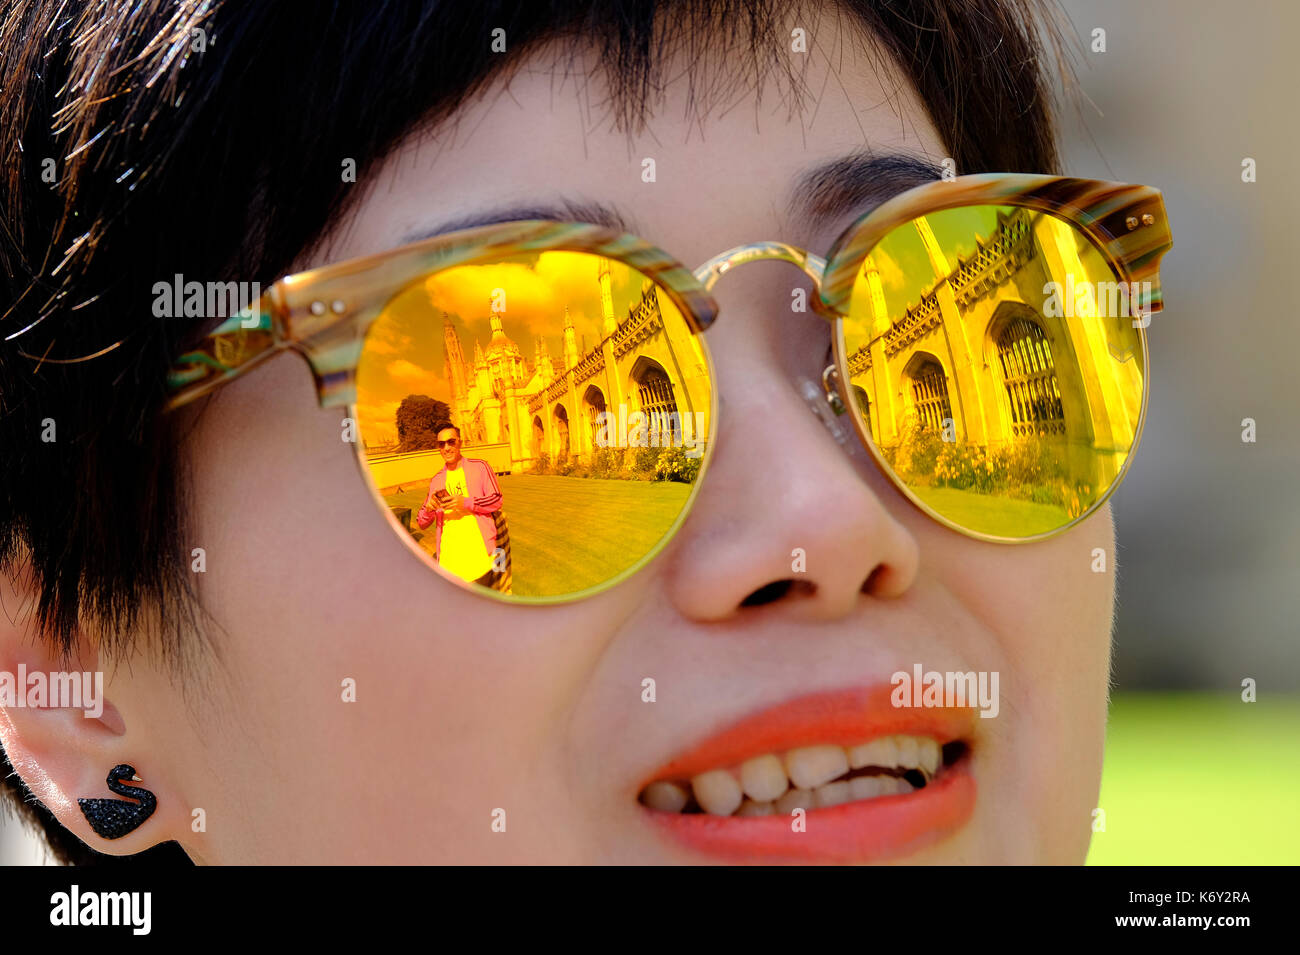 female person wearing tinted yellow sunglasses with reflection of king's college, cambridge university, england Stock Photo